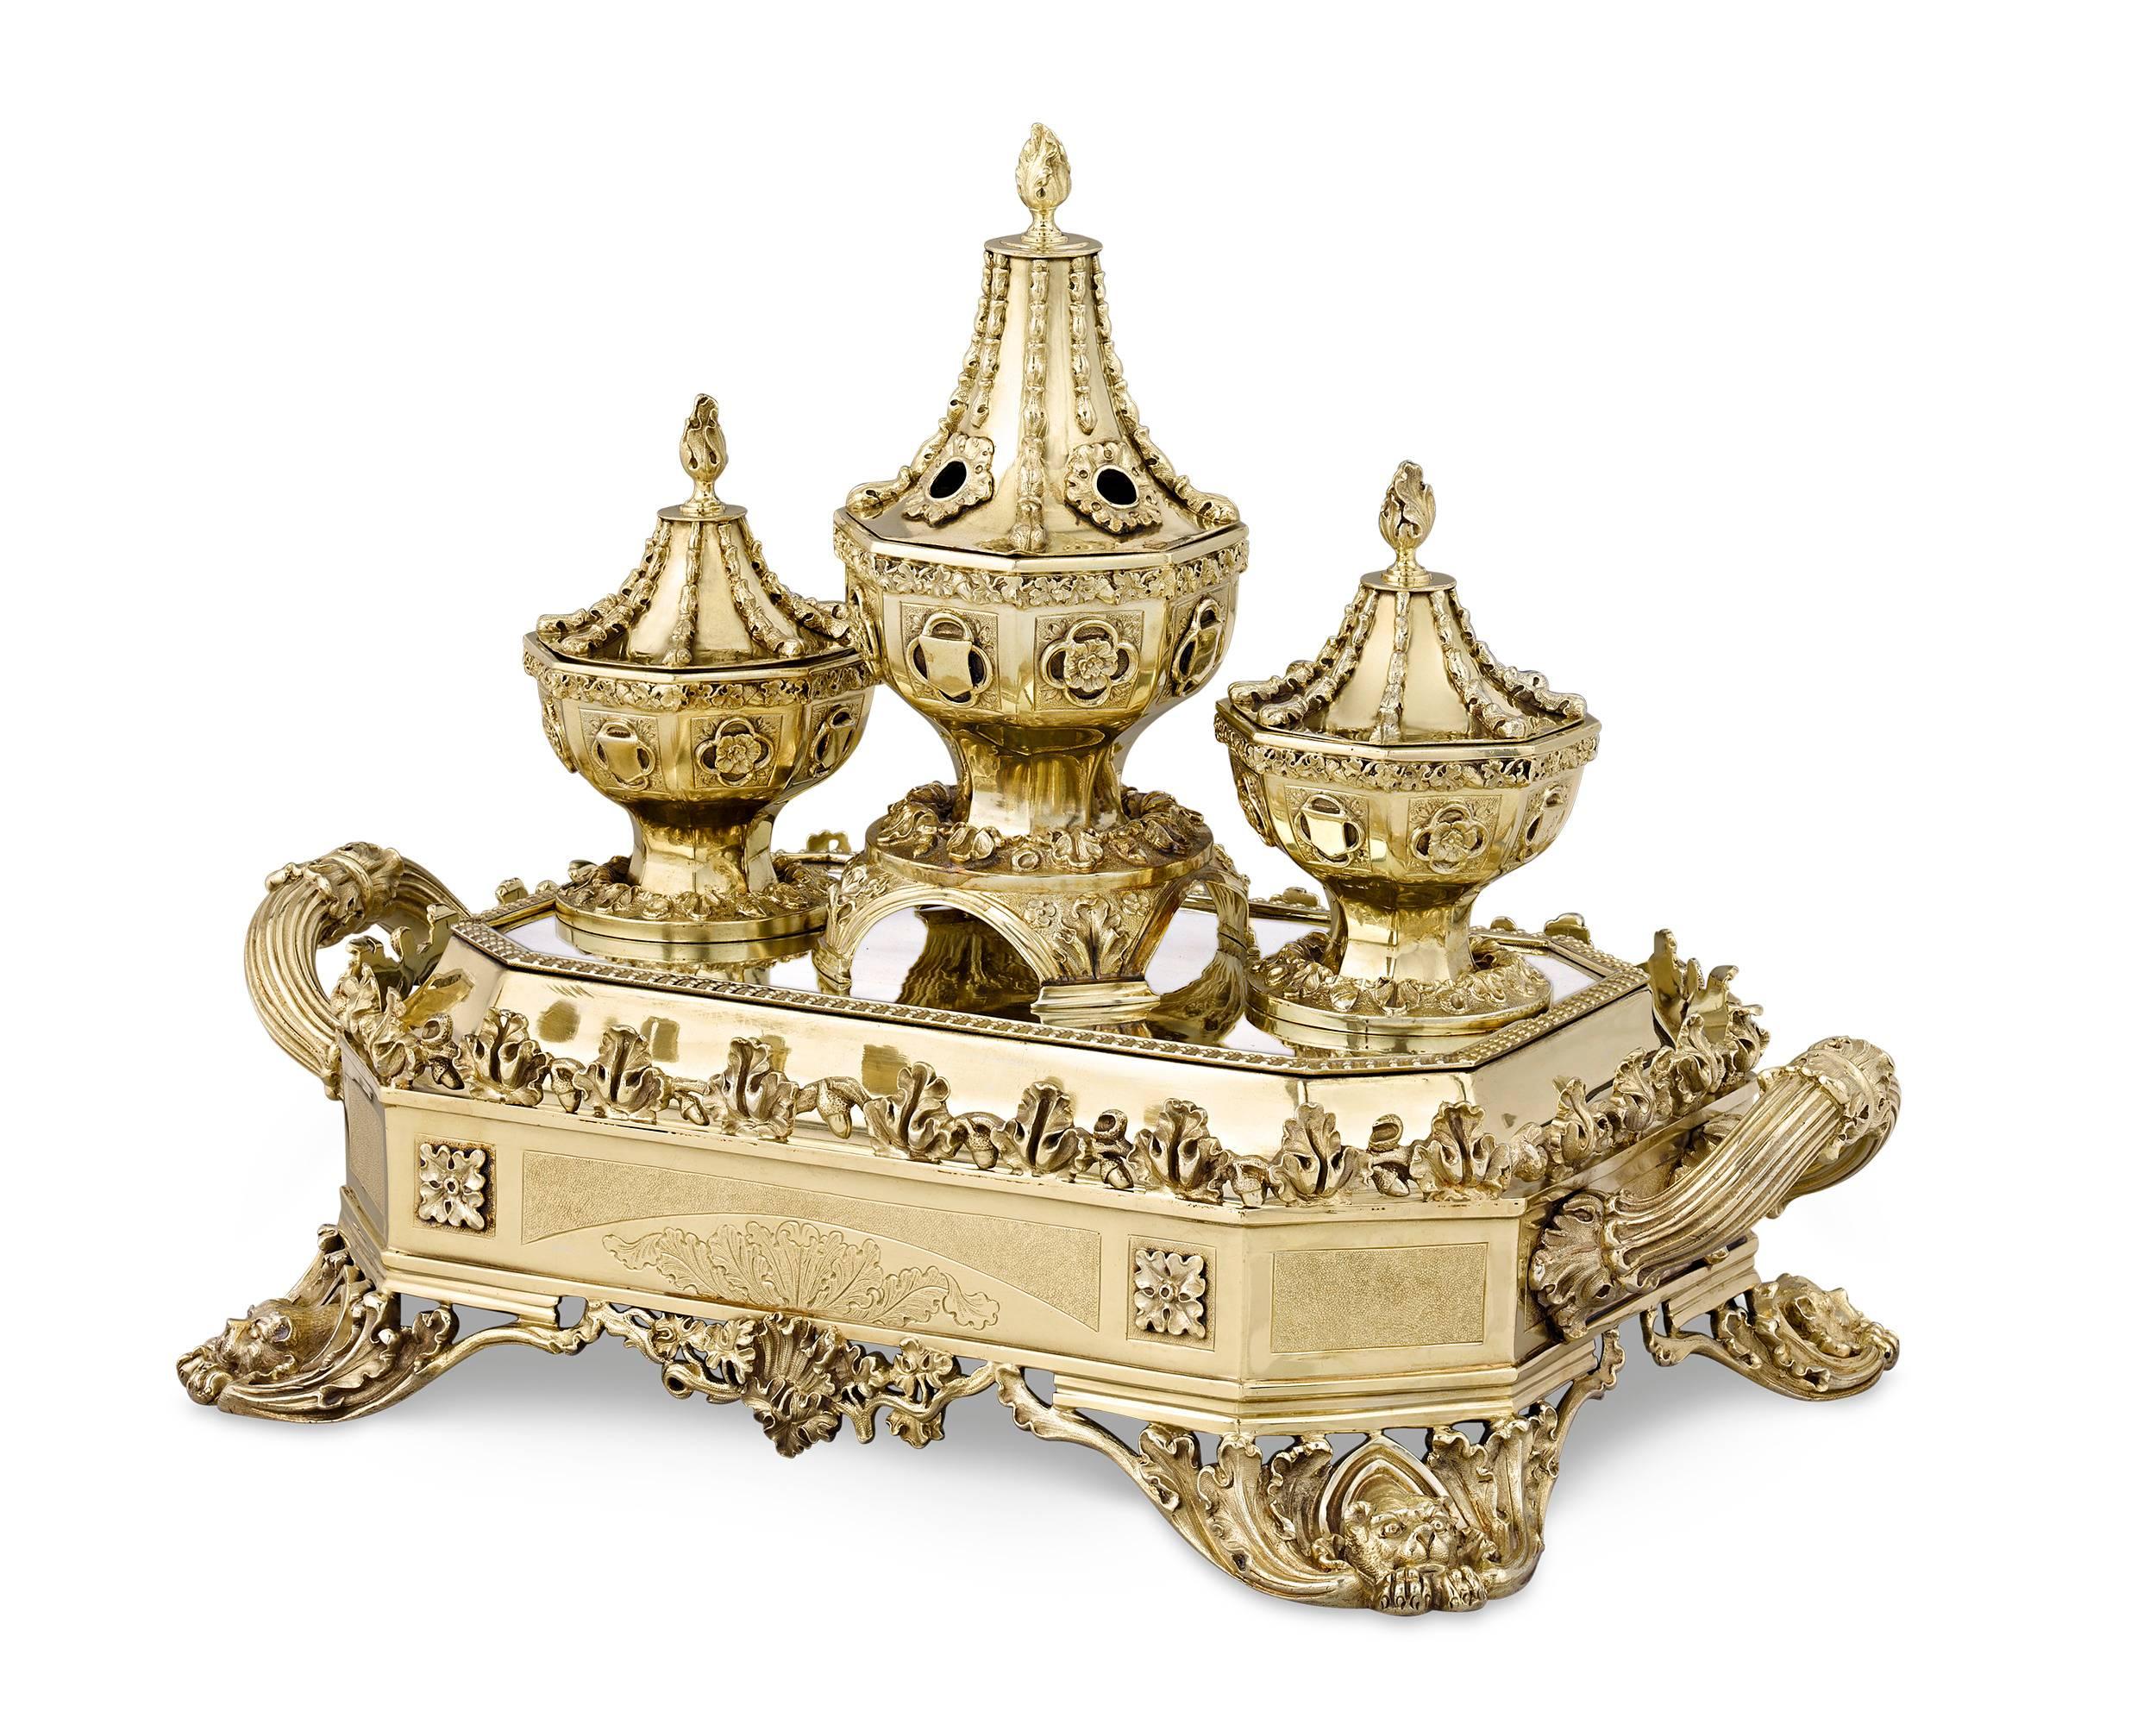 The unbridled boldness of William IV-period silver design is on full display in this grand silver gilt inkstand by William Bateman II. Hailing from one of the most legendary silversmithing families in England, William dutifully continues in the